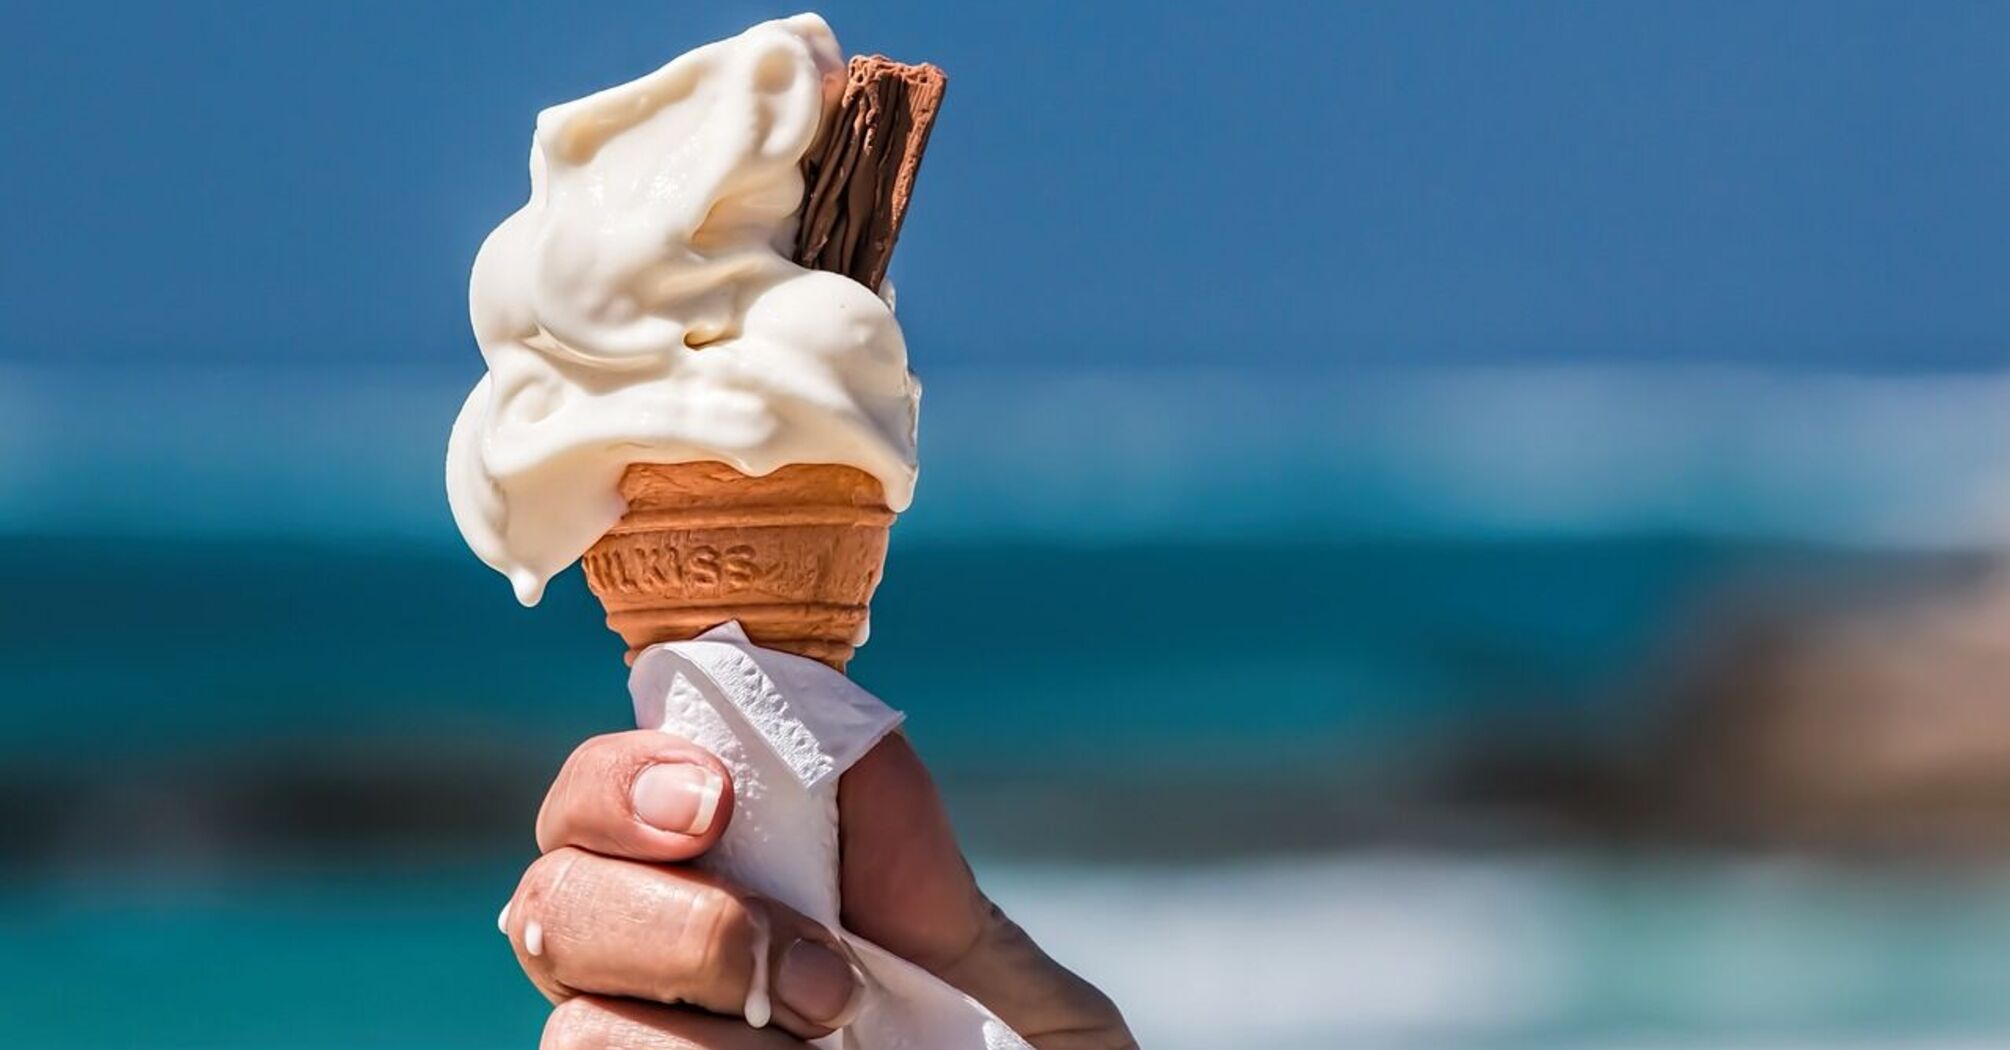 Why free ice cream is massively distributed on cruise ships